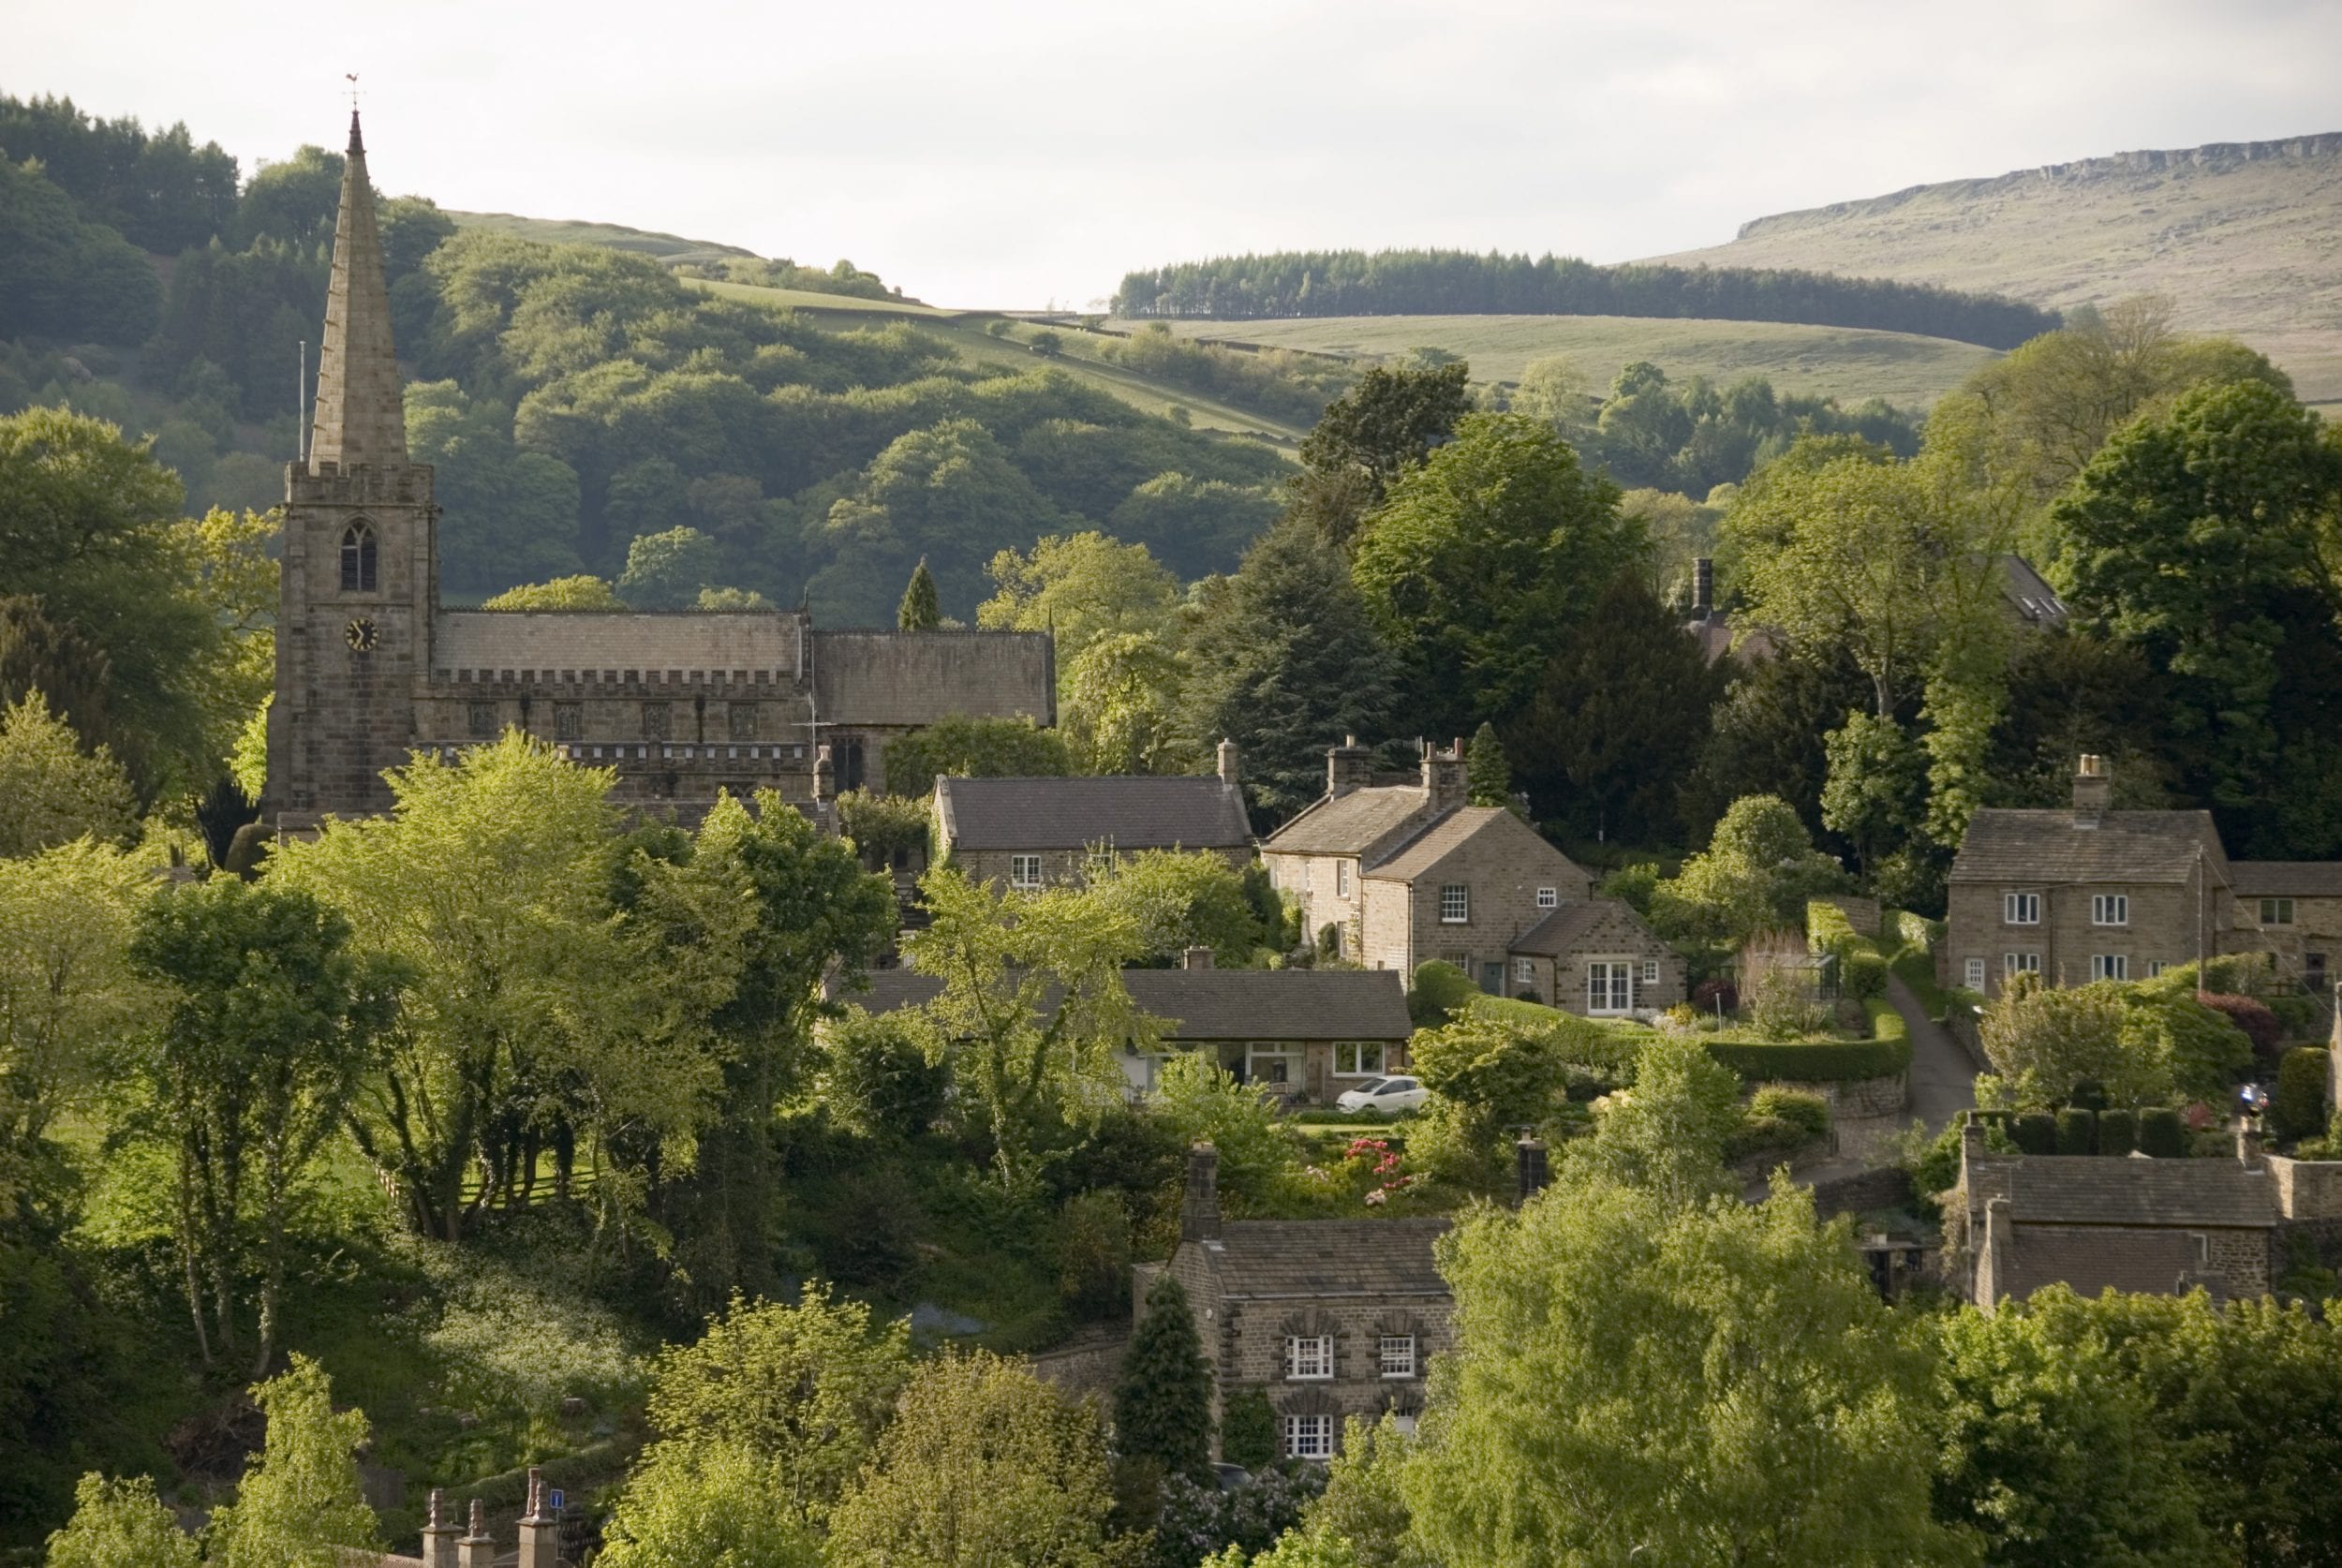 Hathersage village and church nestled in the rolling hillsides of the Peak District, Derbyshire UK